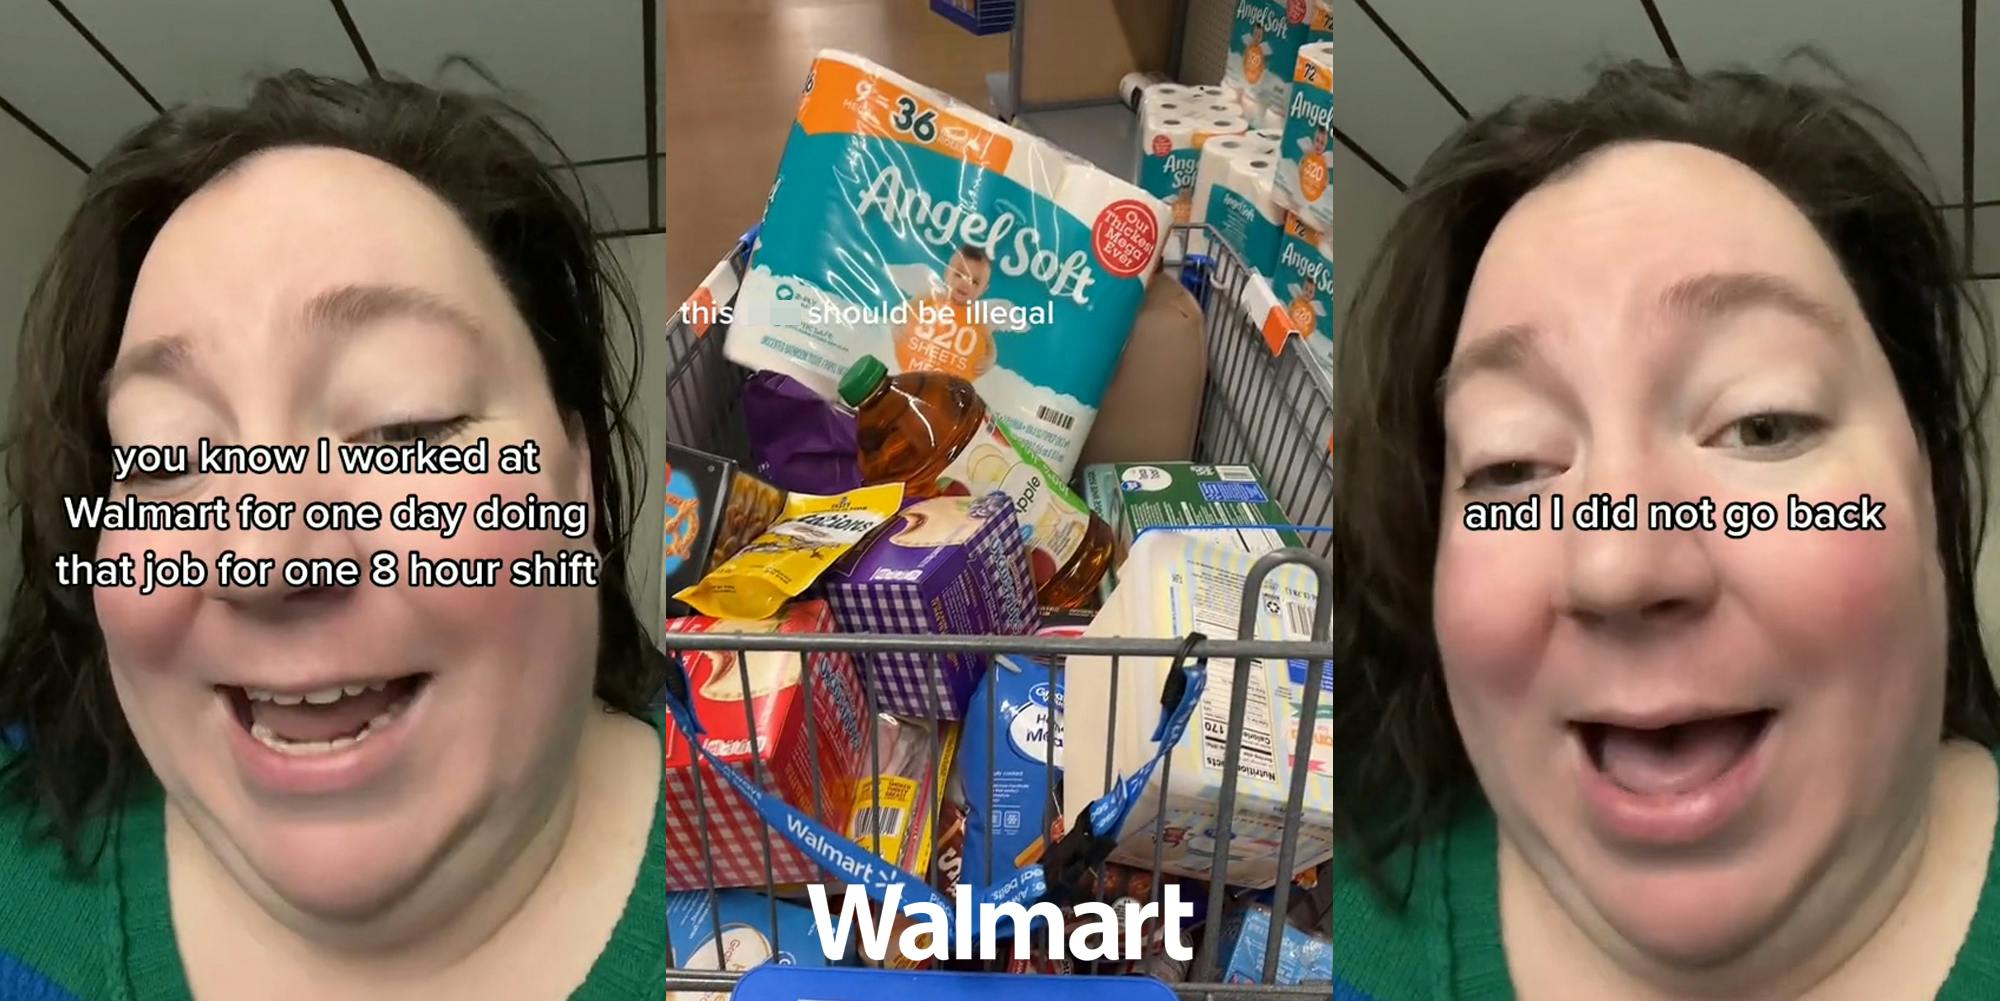 former Walmart employee speaking with caption "you know I worked at Walmart for one day doing that job for one 8 hour shift" (l) Walmart online order picker with grocery cart full with caption "this blank should be illegal" with Walmart logo at bottom (c) former Walmart employee speaking with caption "and I did not go back" (r)